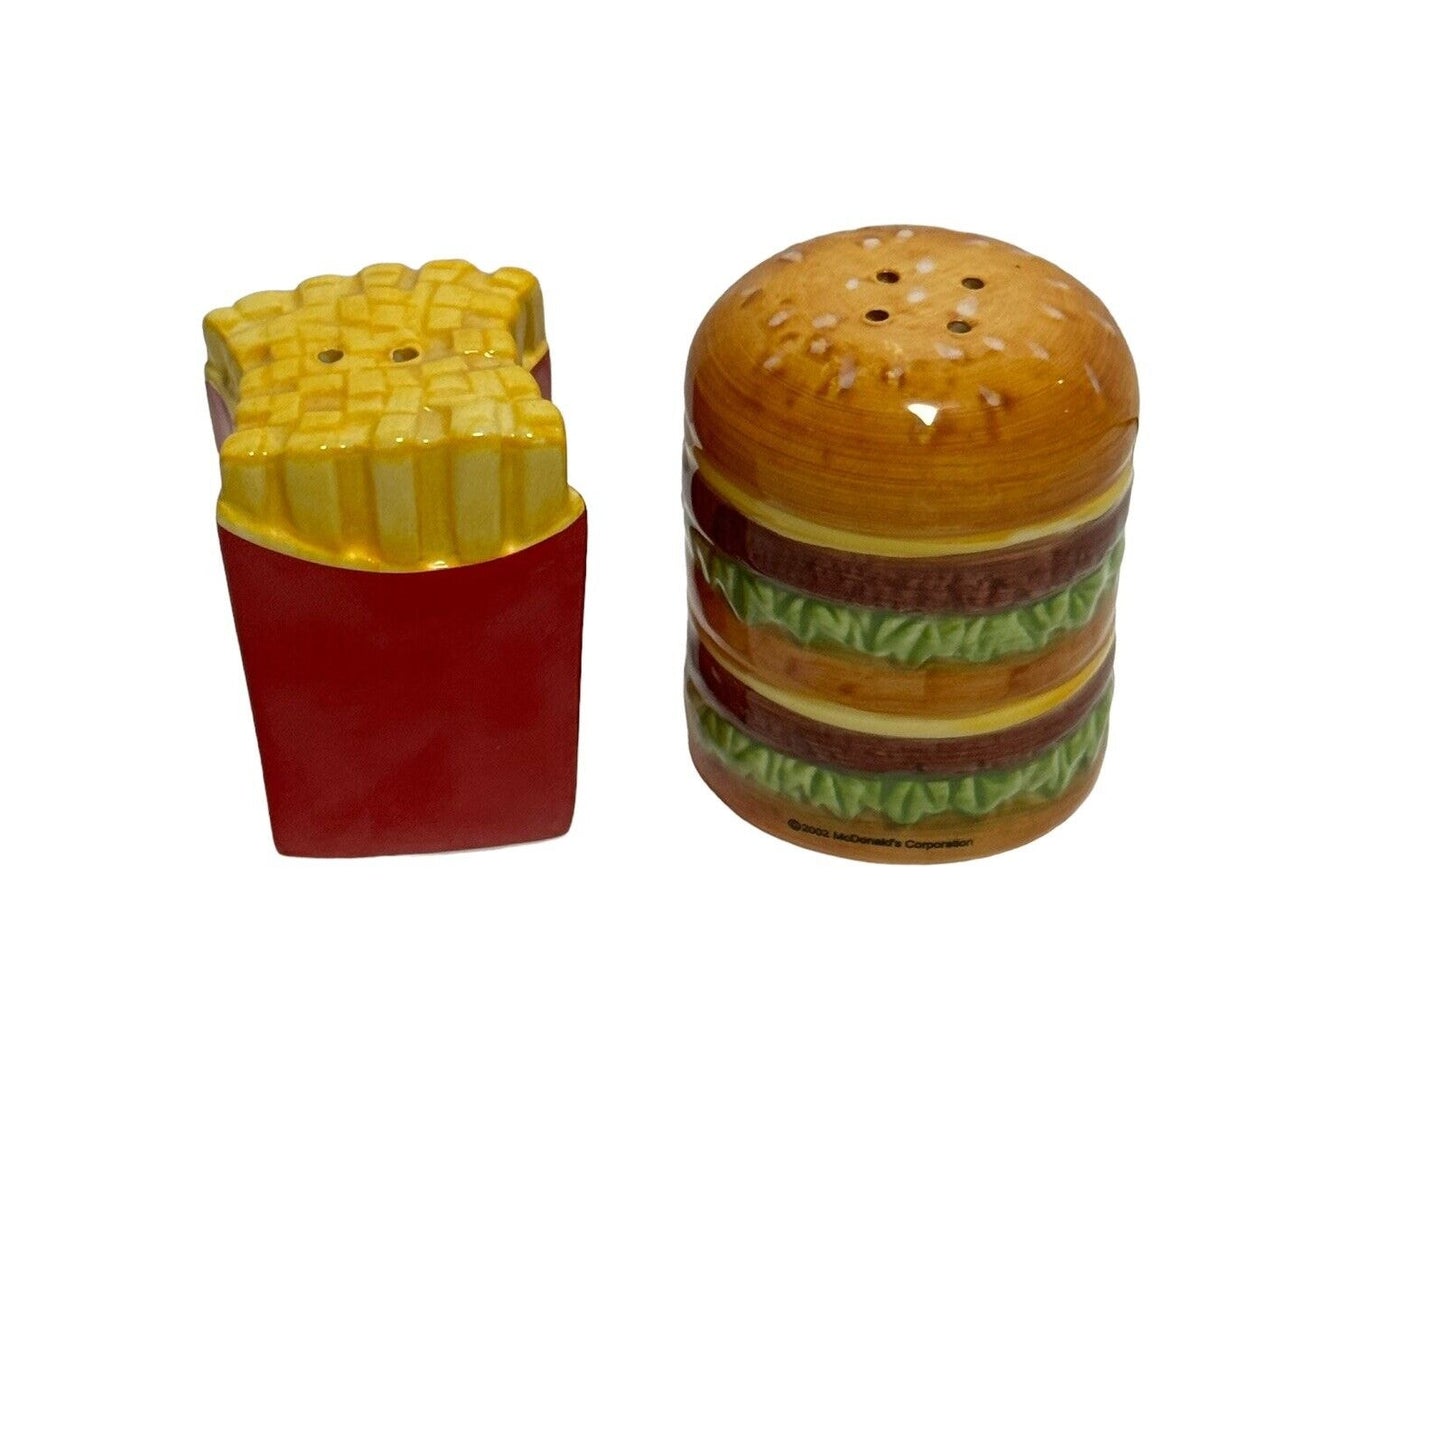 Vintage McDonald's Salt & Pepper Shakers Cheeseburger & French Fries 2002 Giftco